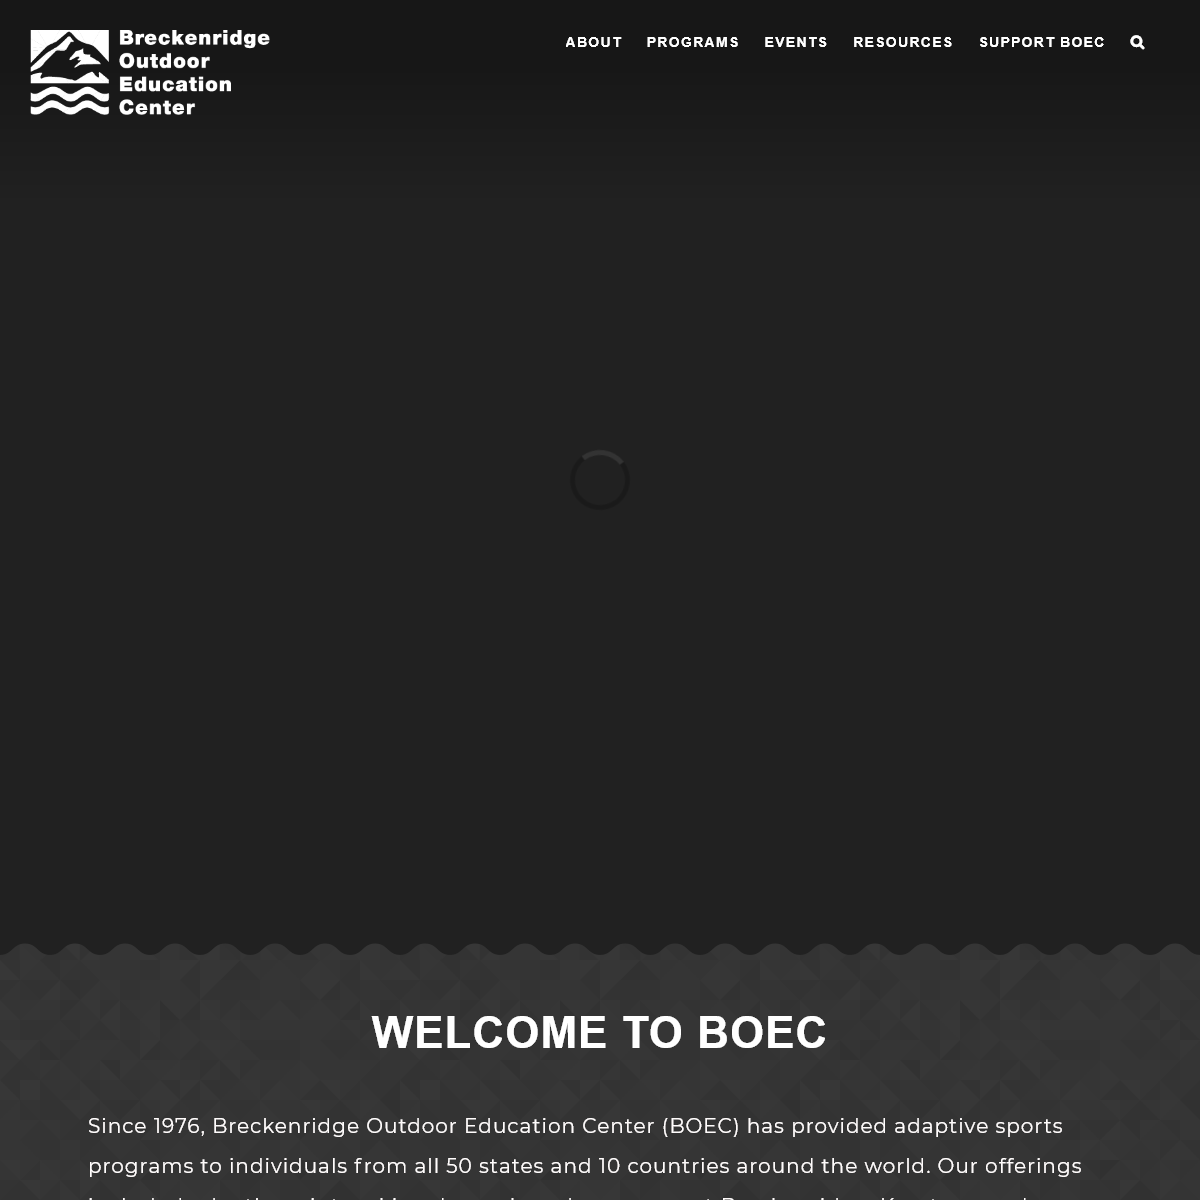 A complete backup of boec.org